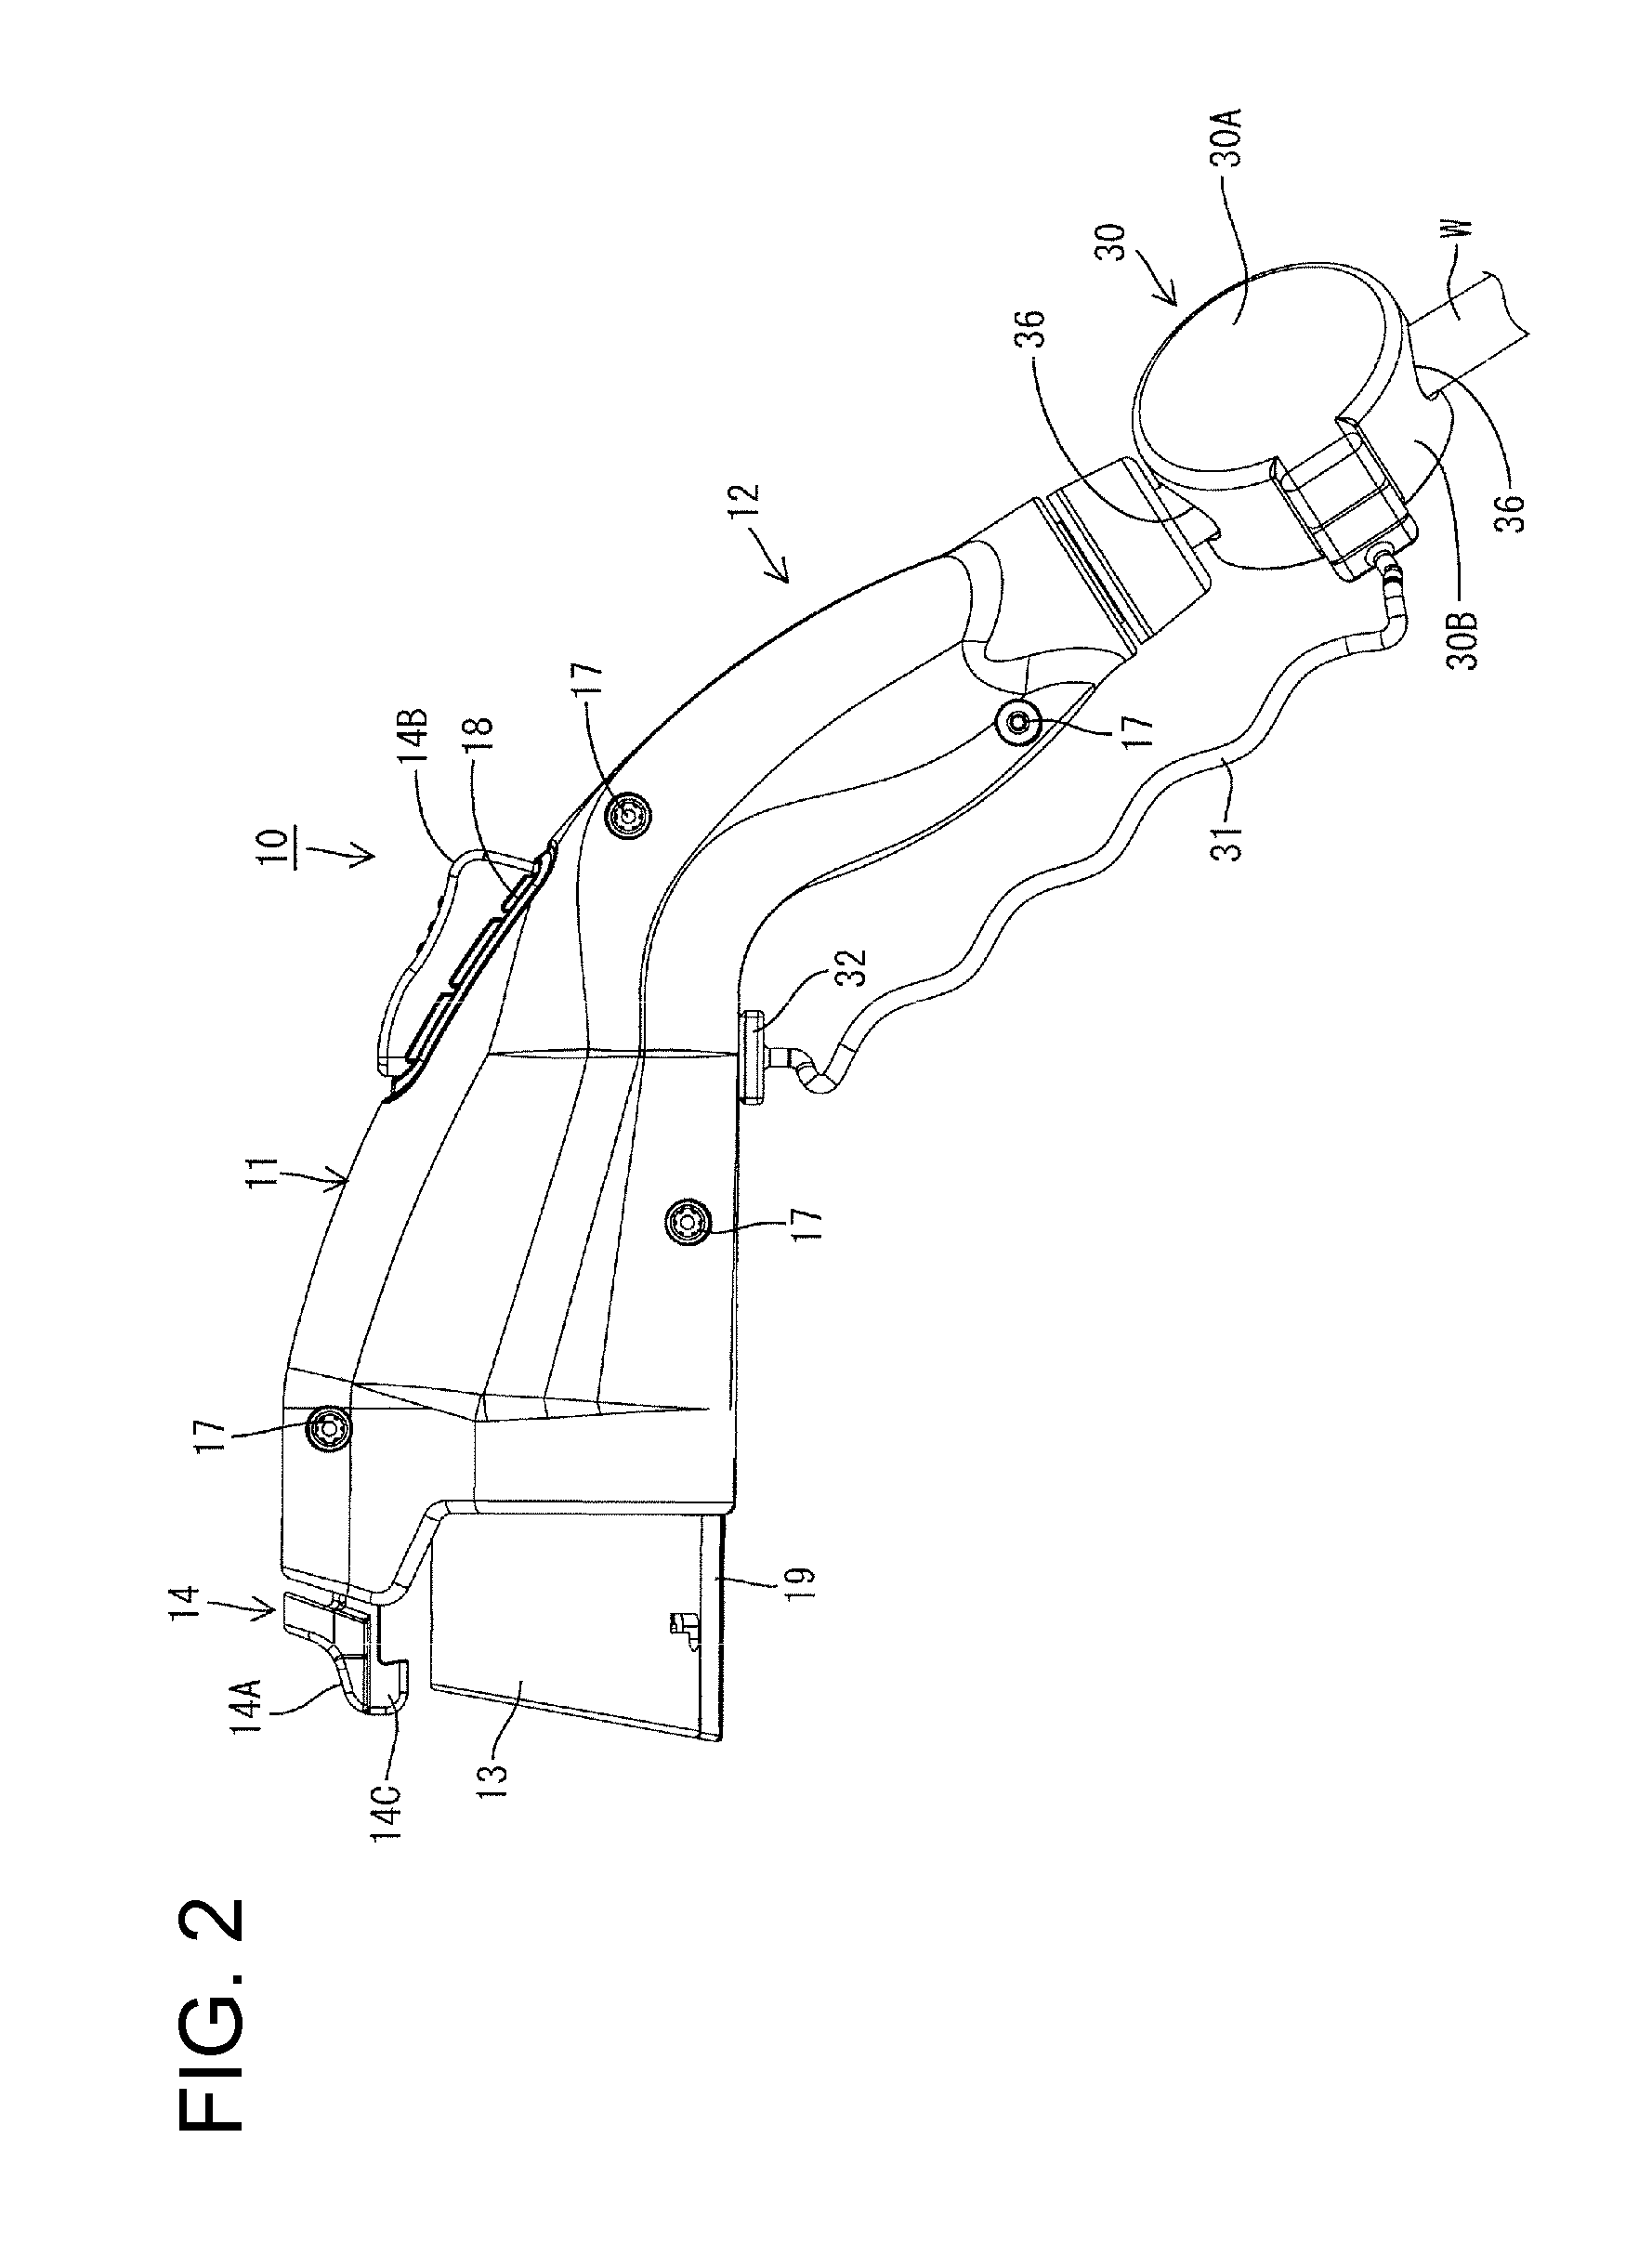 Charging connector and method of mounting it